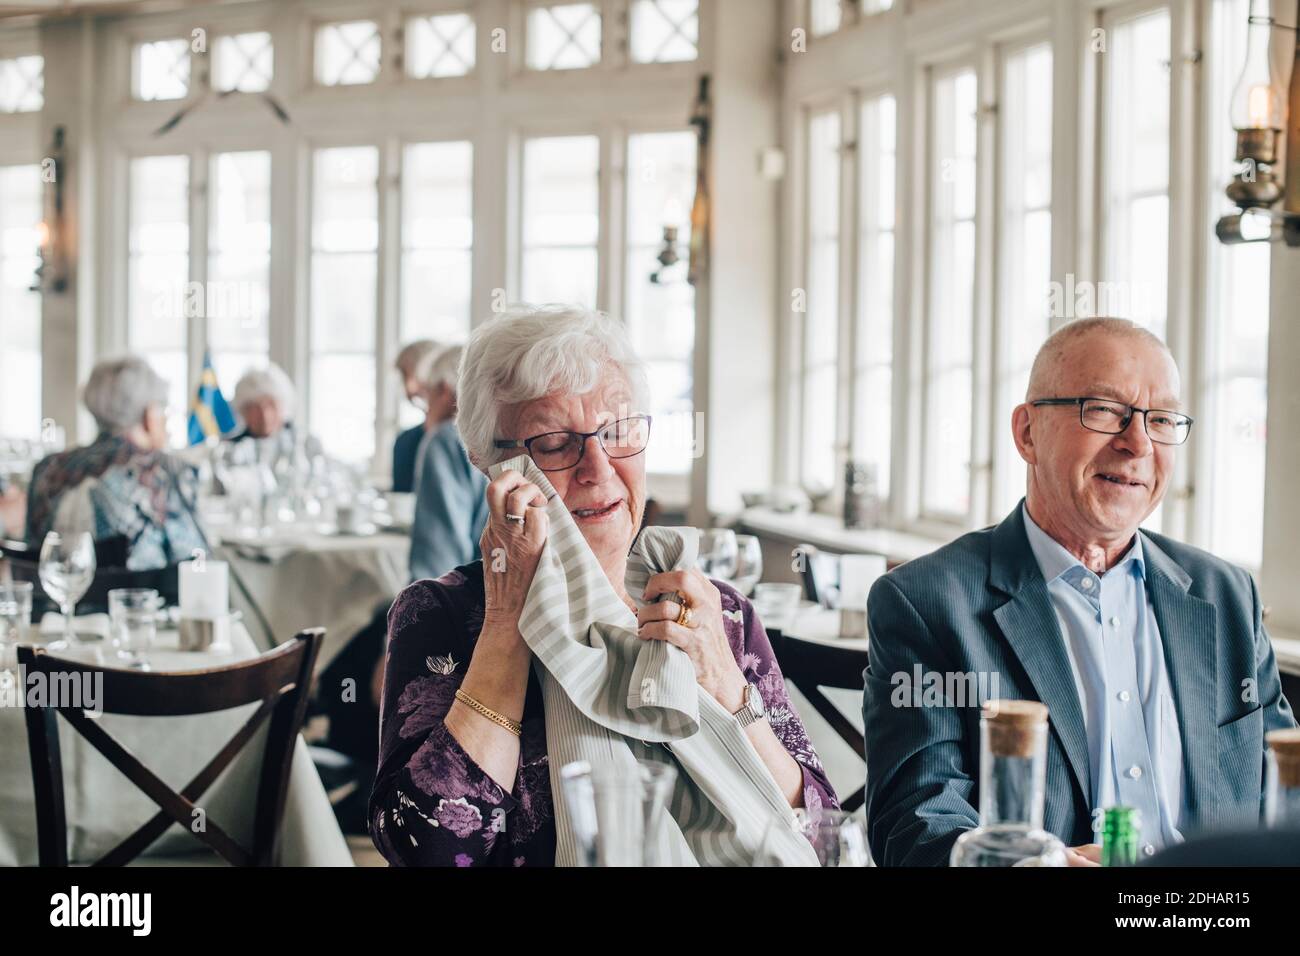 Senior woman crying while male friend smiling in restaurant Stock Photo